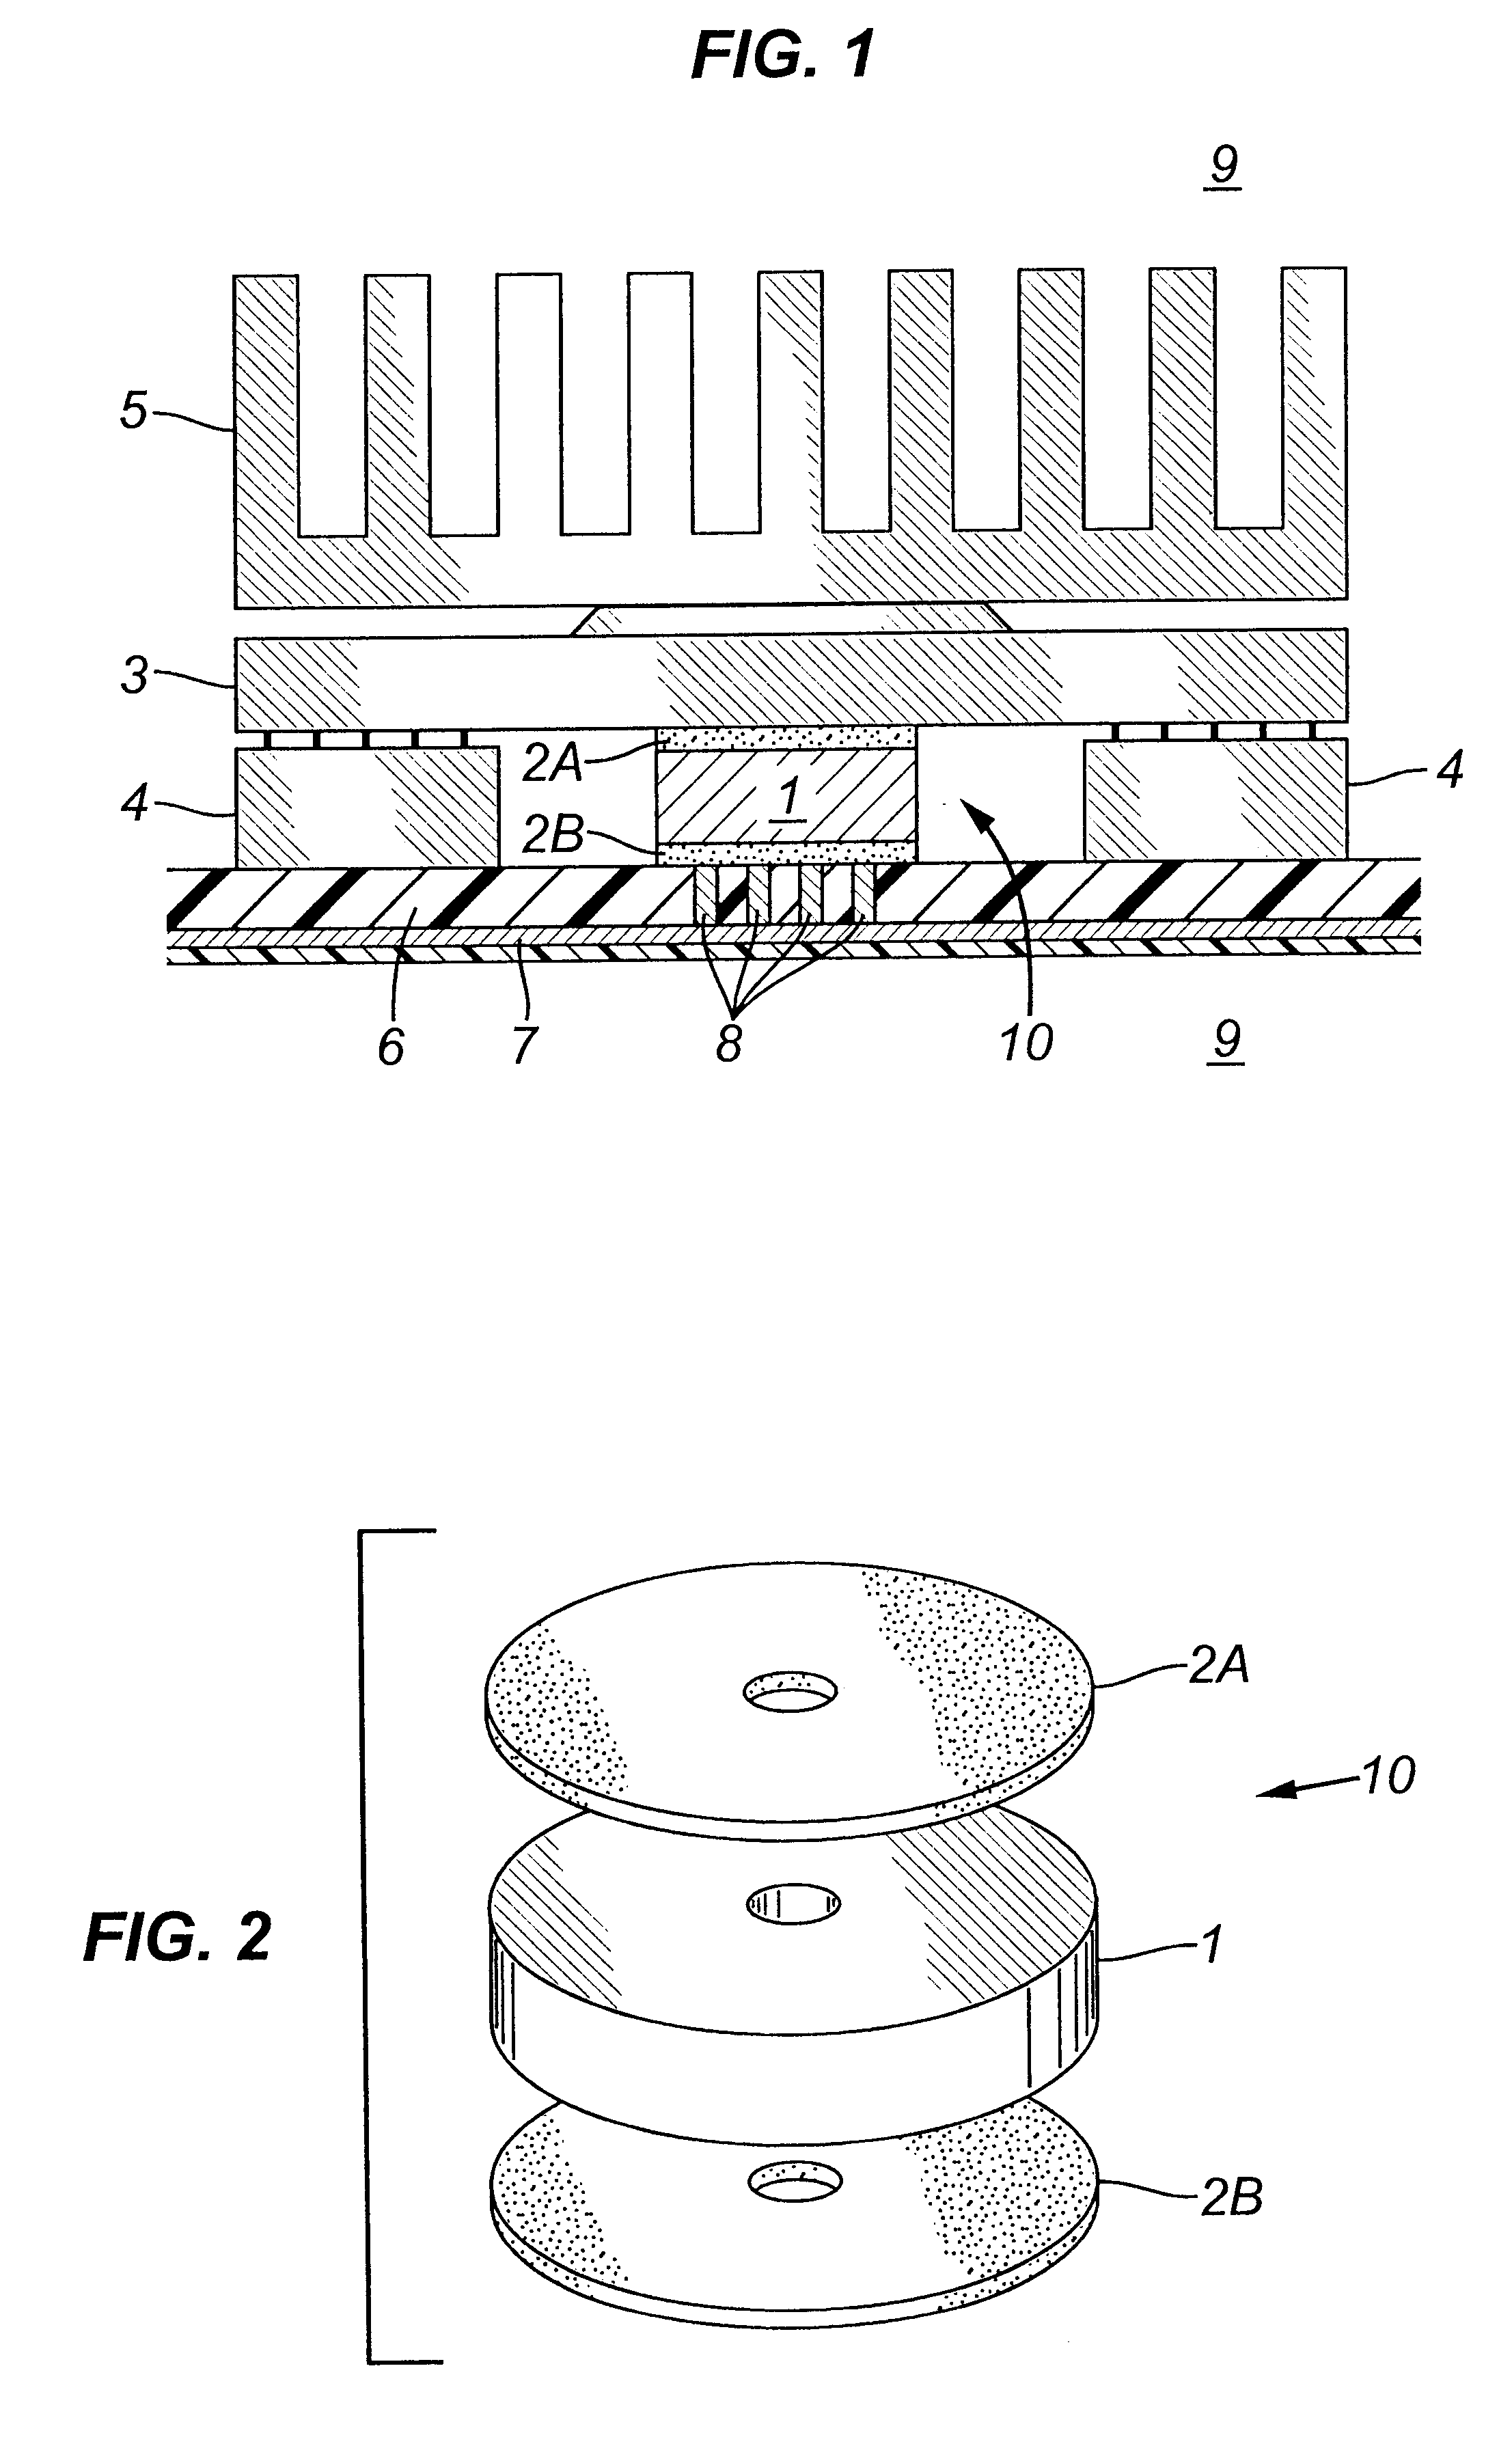 Method and apparatus for heat dispersion from the bottom side of integrated circuit packages on printed circuit boards